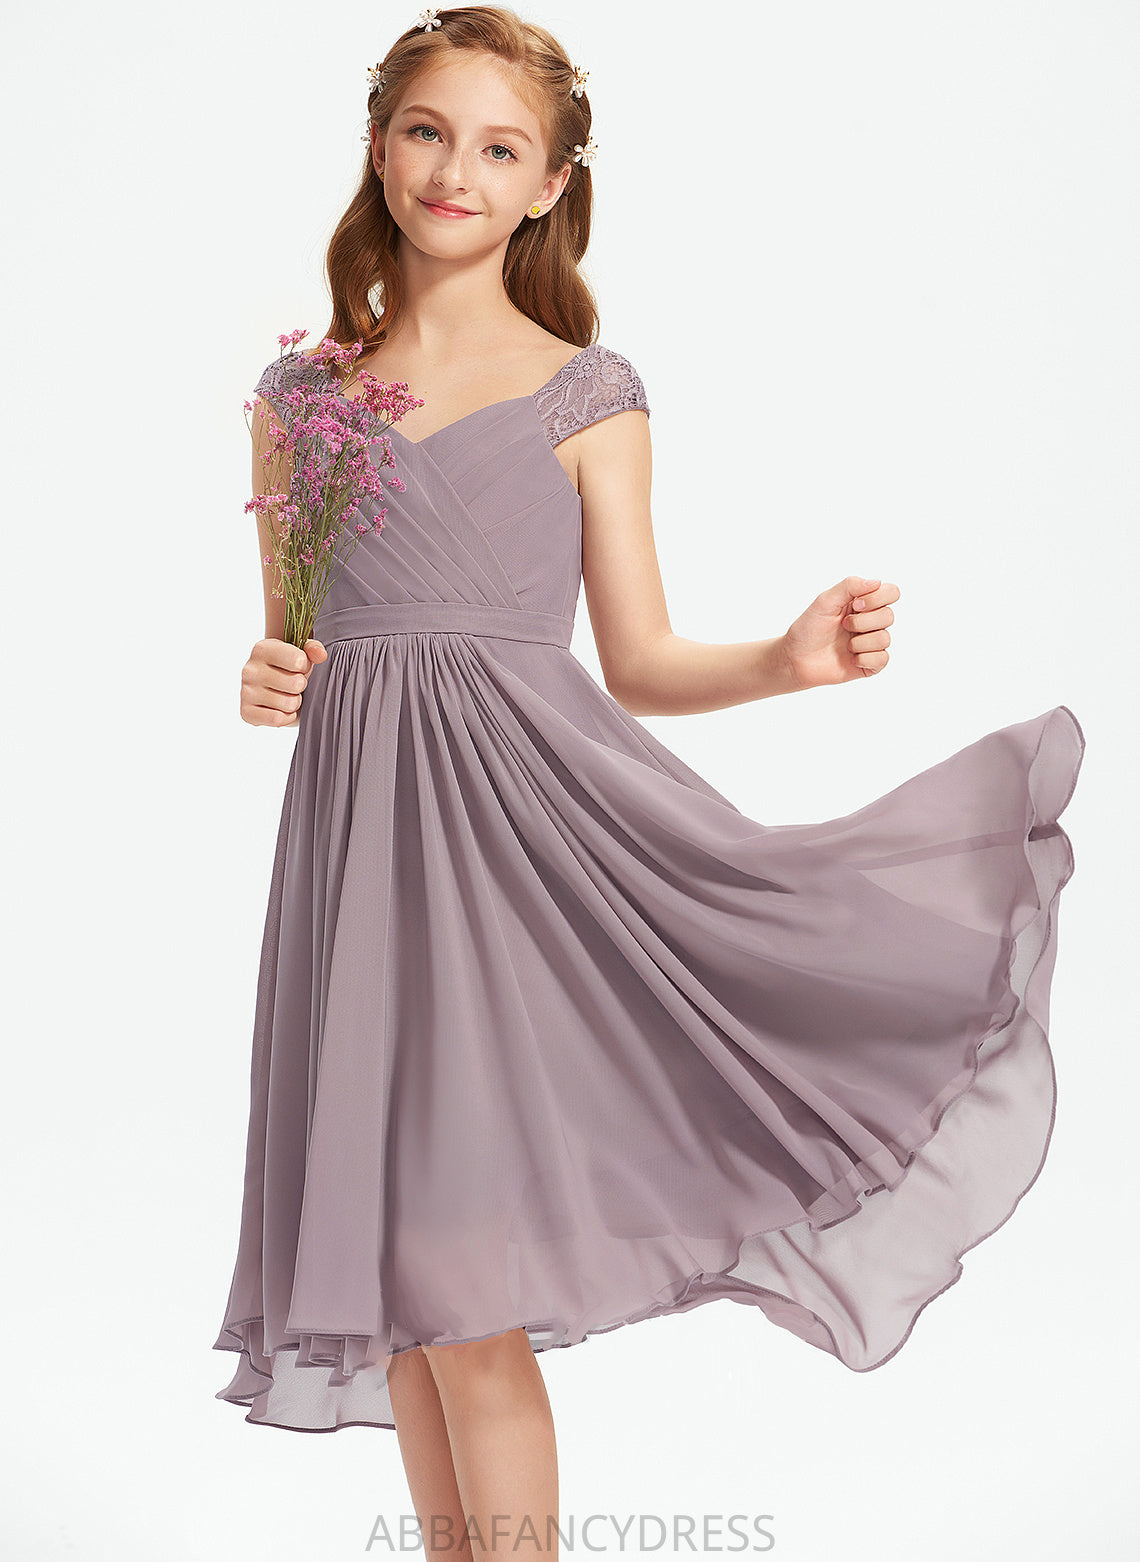 Ruffle Junior Bridesmaid Dresses Knee-Length Chiffon With Lace A-Line V-neck Kelly